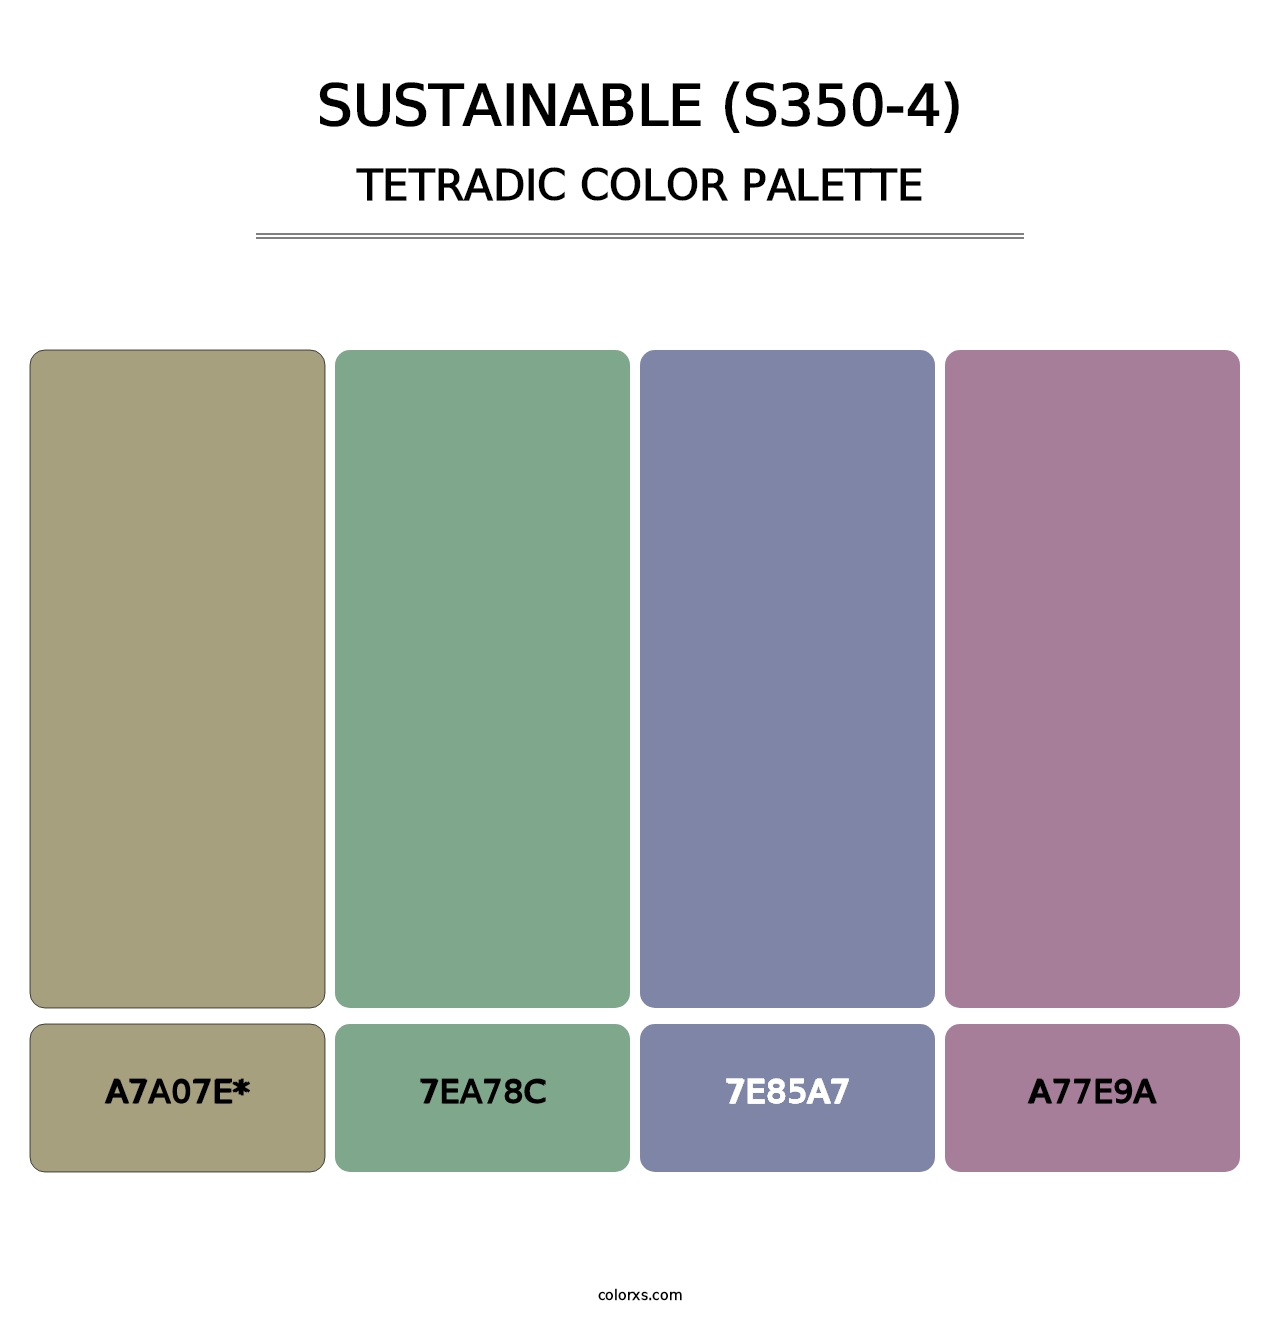 Sustainable (S350-4) - Tetradic Color Palette